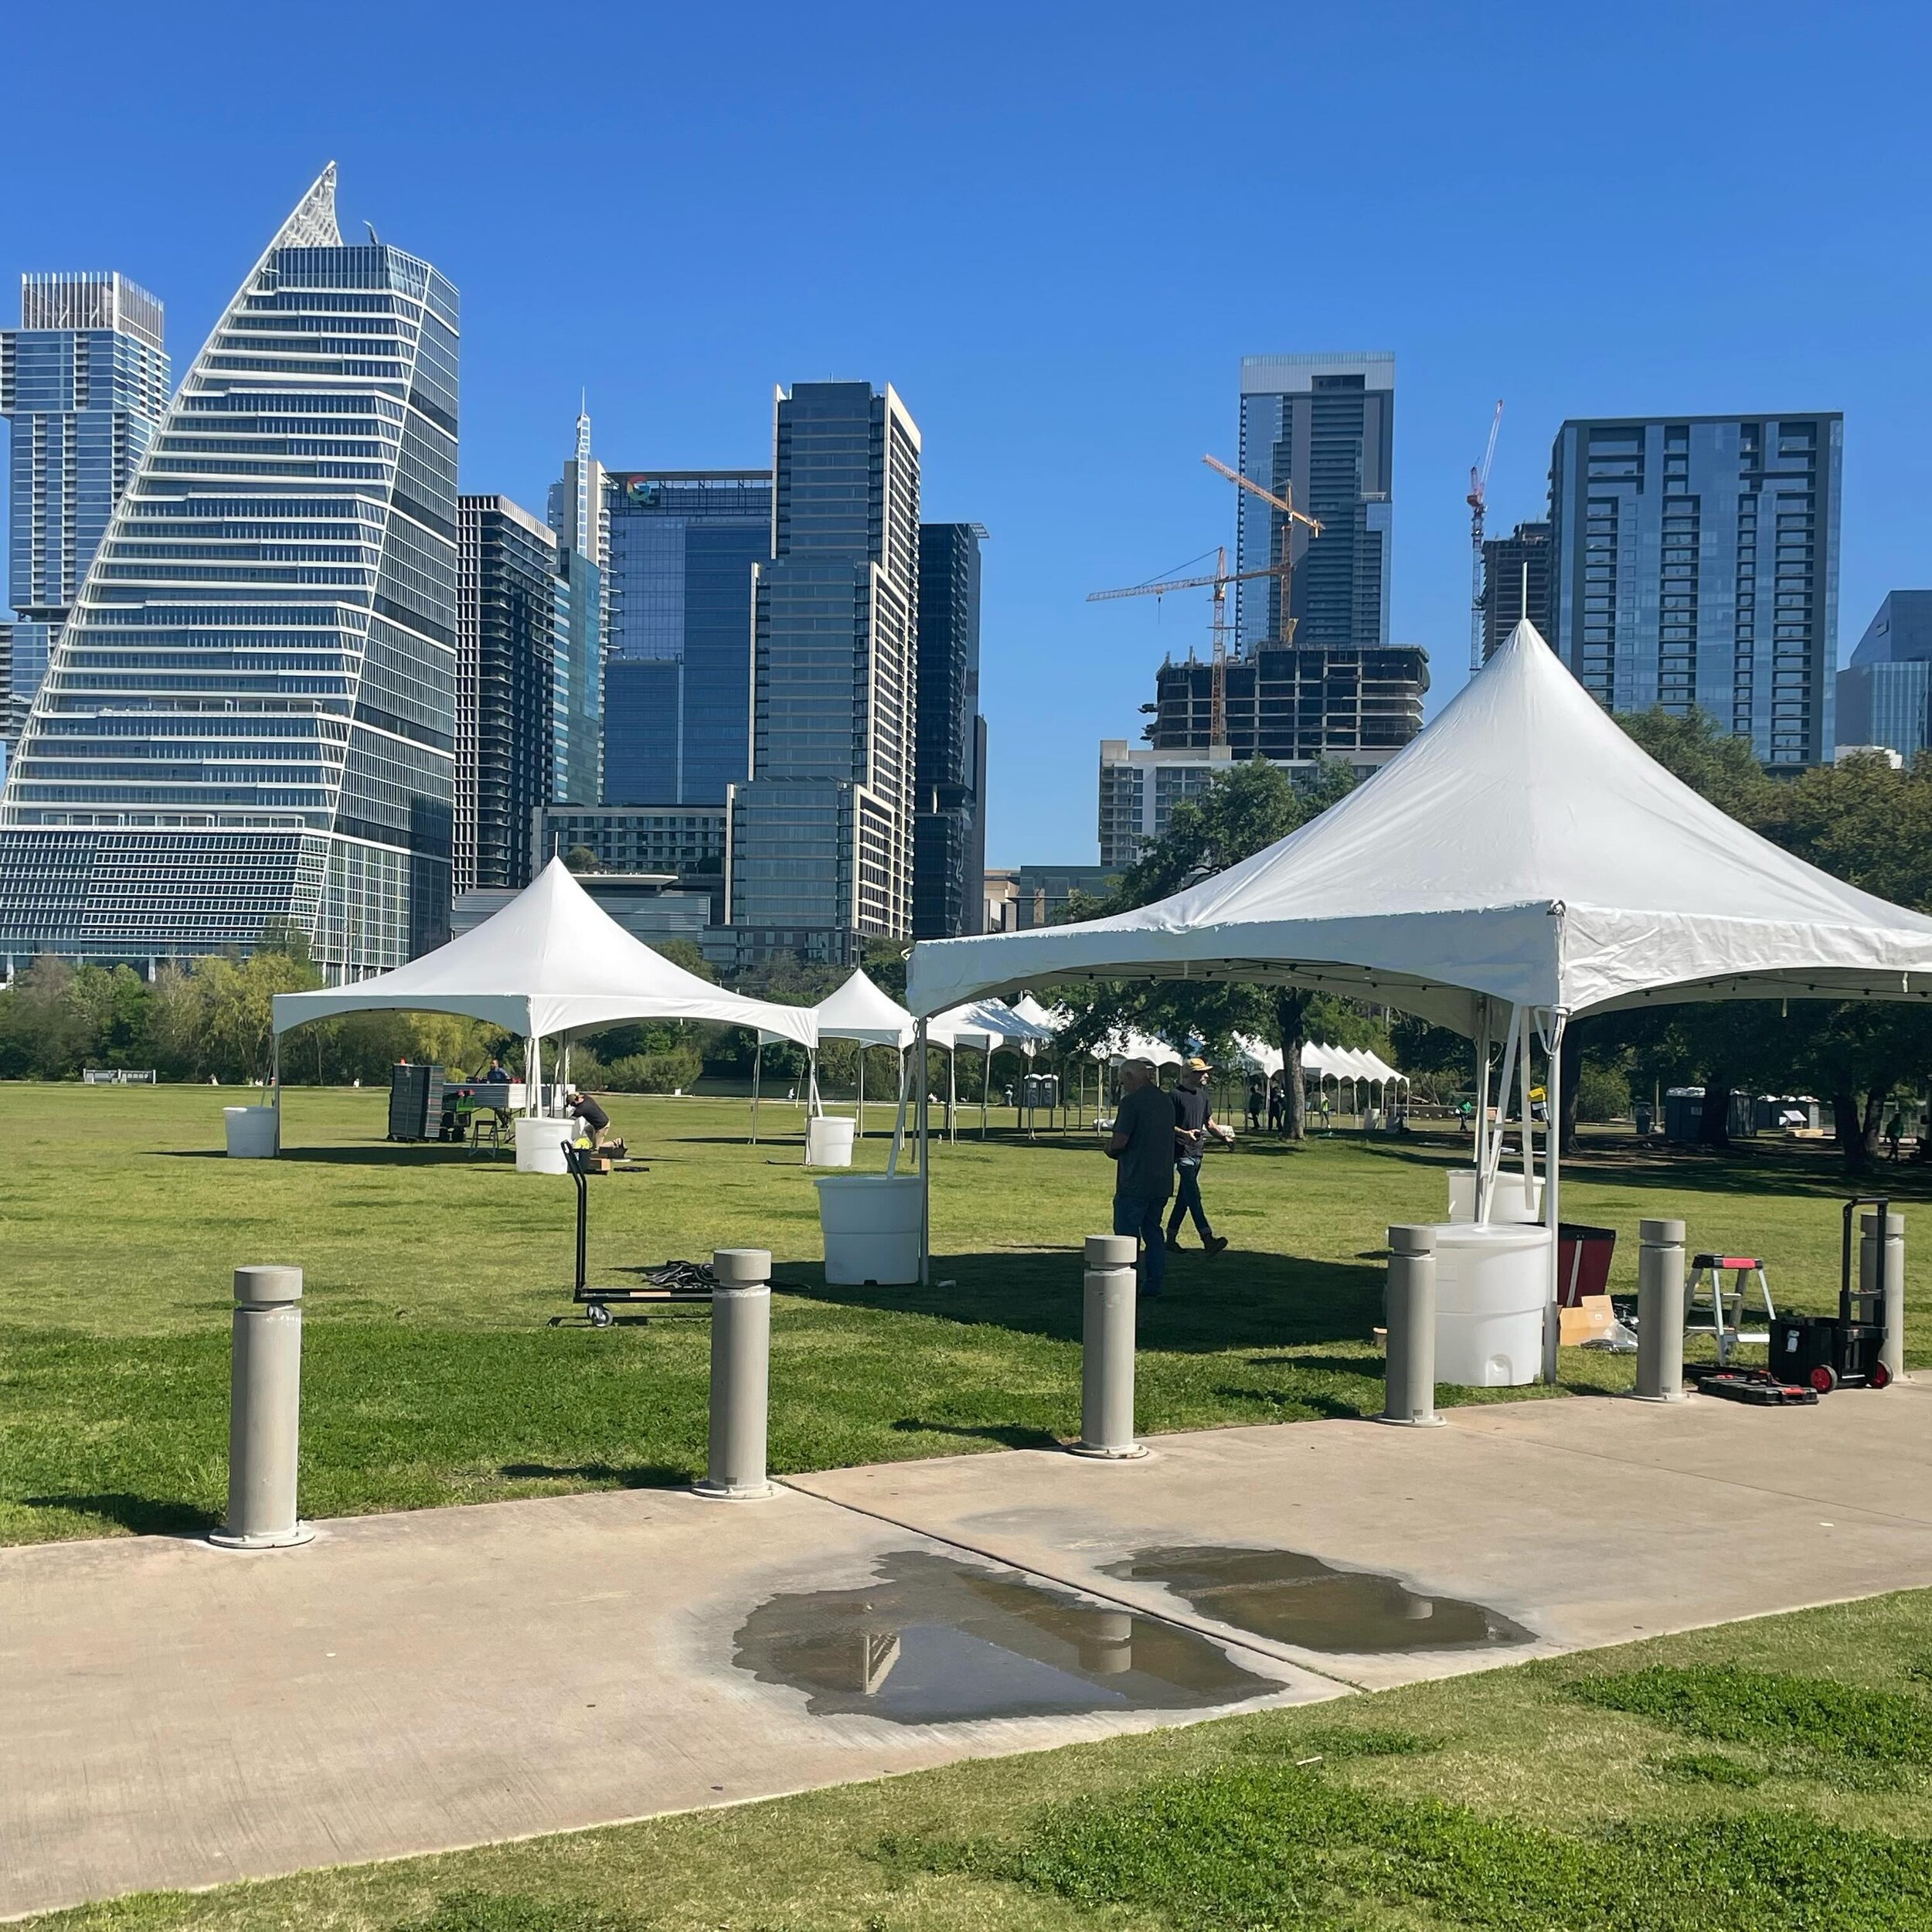 Our 20&rsquo;x20&rsquo; high peak tents will be at the Urban Music Festival this weekend! Don&rsquo;t they look cute against the Austin skyline? Go see them at Auditorium Shores (and catch some great musical acts while you&rsquo;re there).

Oh, and b